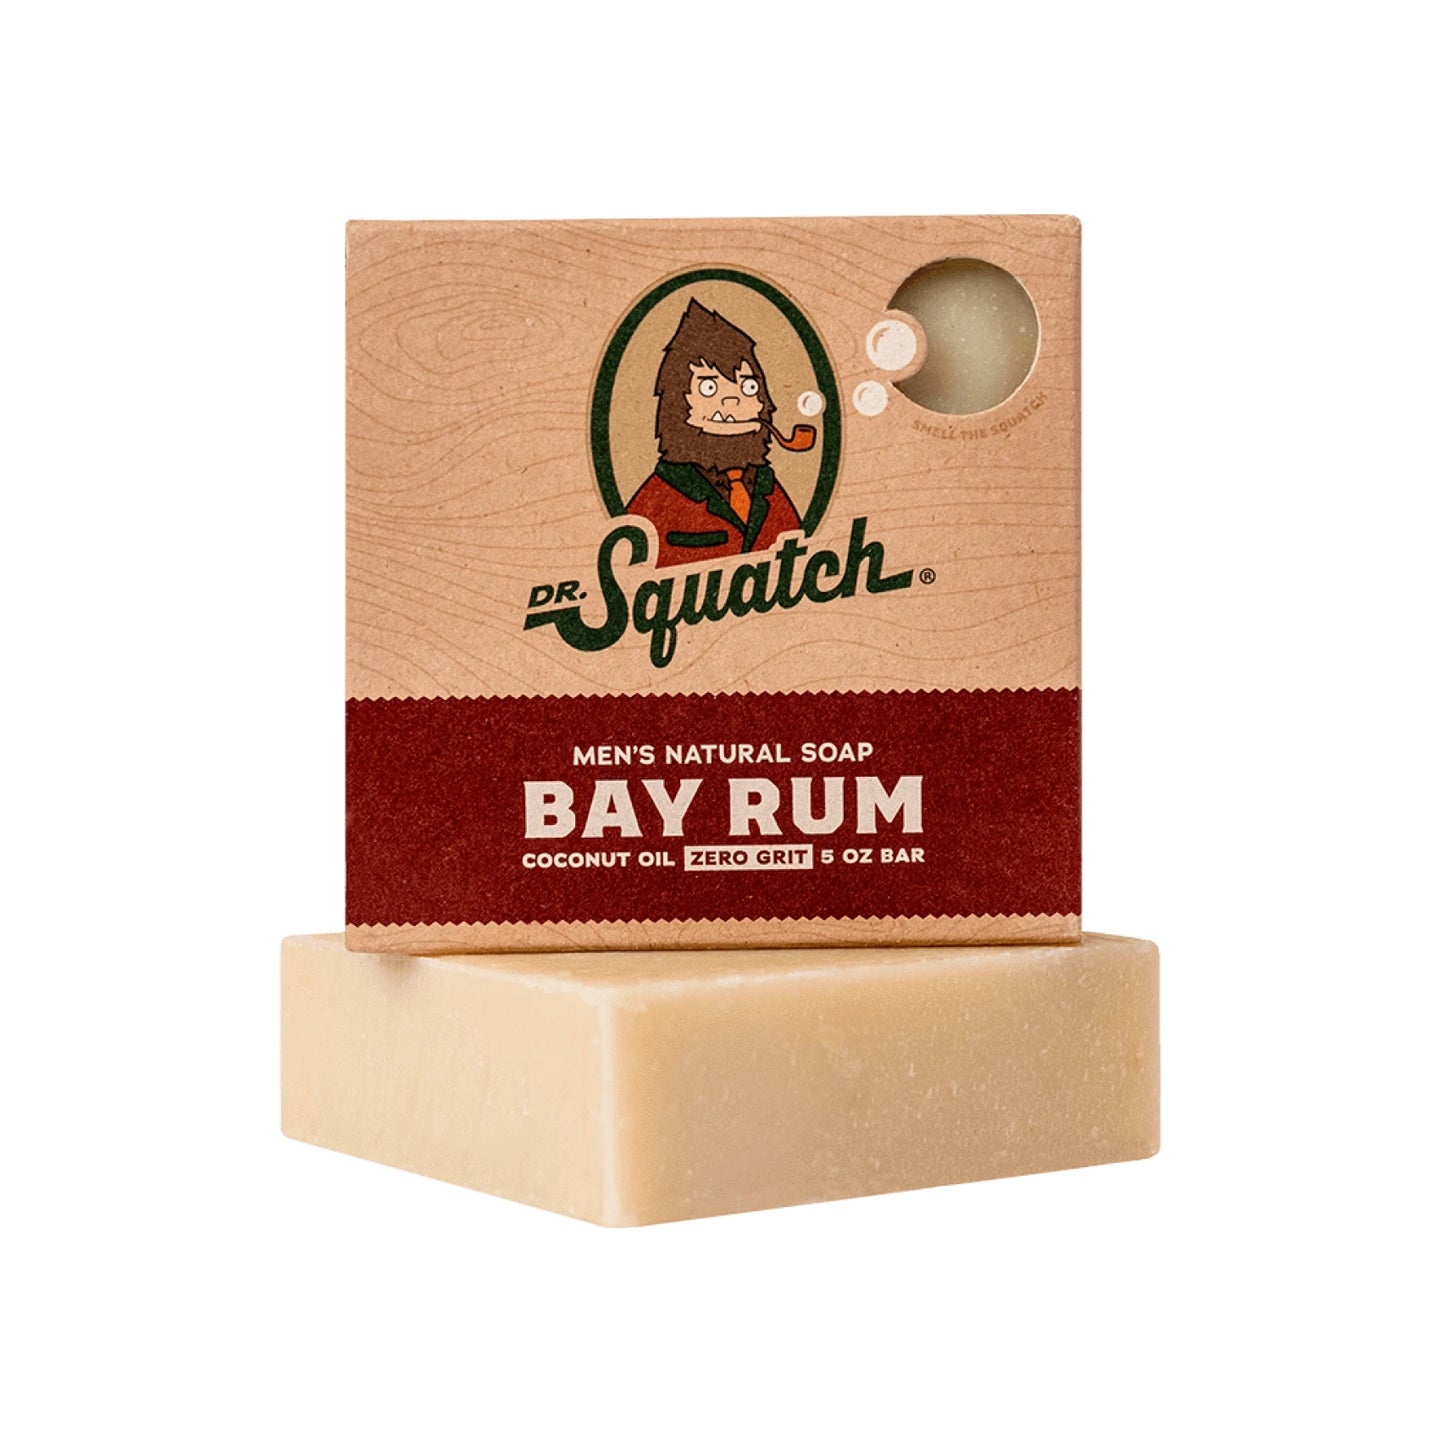 Dr. Squatch Bay Rum Soap 4-Pack Bundle – Bar Soap for Men with Natural  Scent, Bay Rum, Kaolin Clay, …See more Dr. Squatch Bay Rum Soap 4-Pack  Bundle –